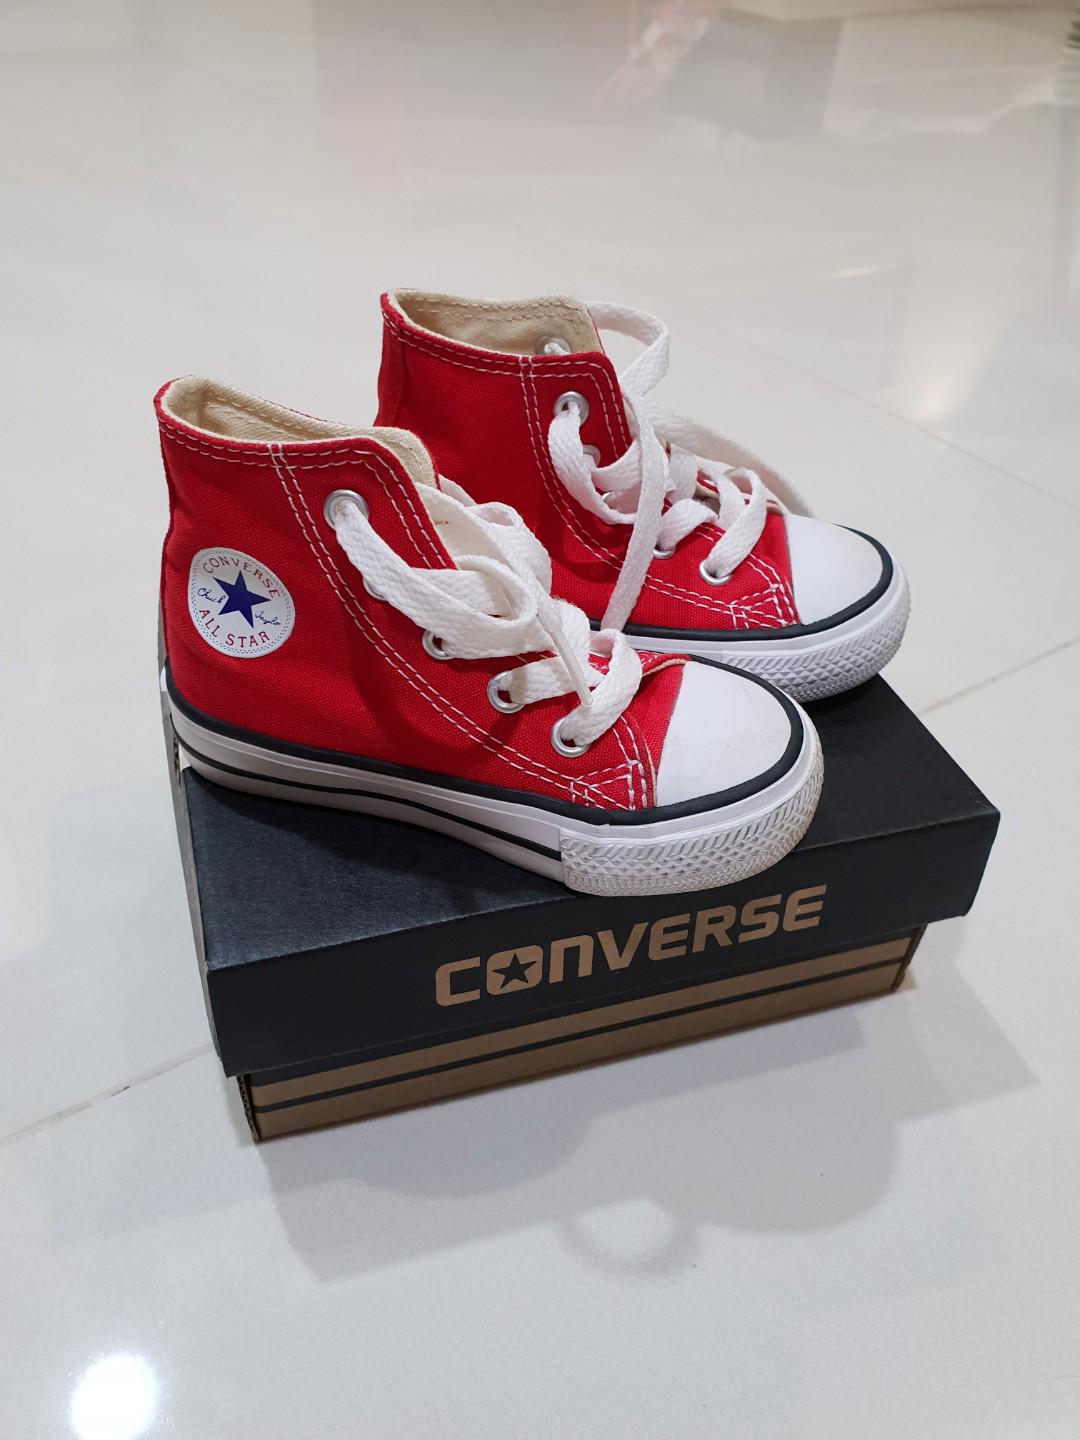 toddler size 5 converse shoes